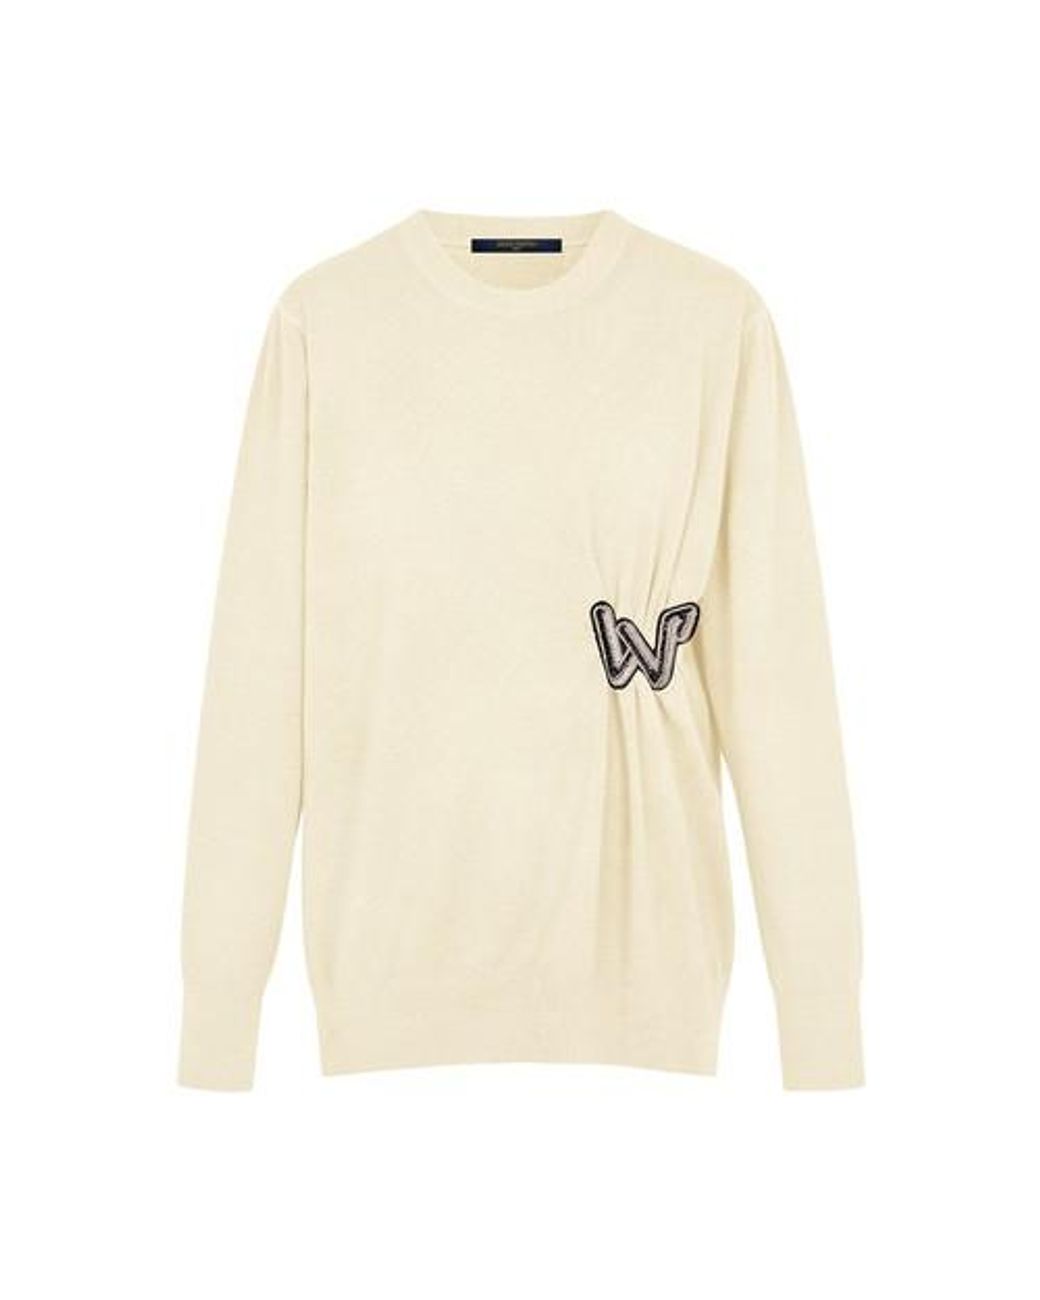 Louis Vuitton Crochet Knit Cropped Pullover White. Size S0